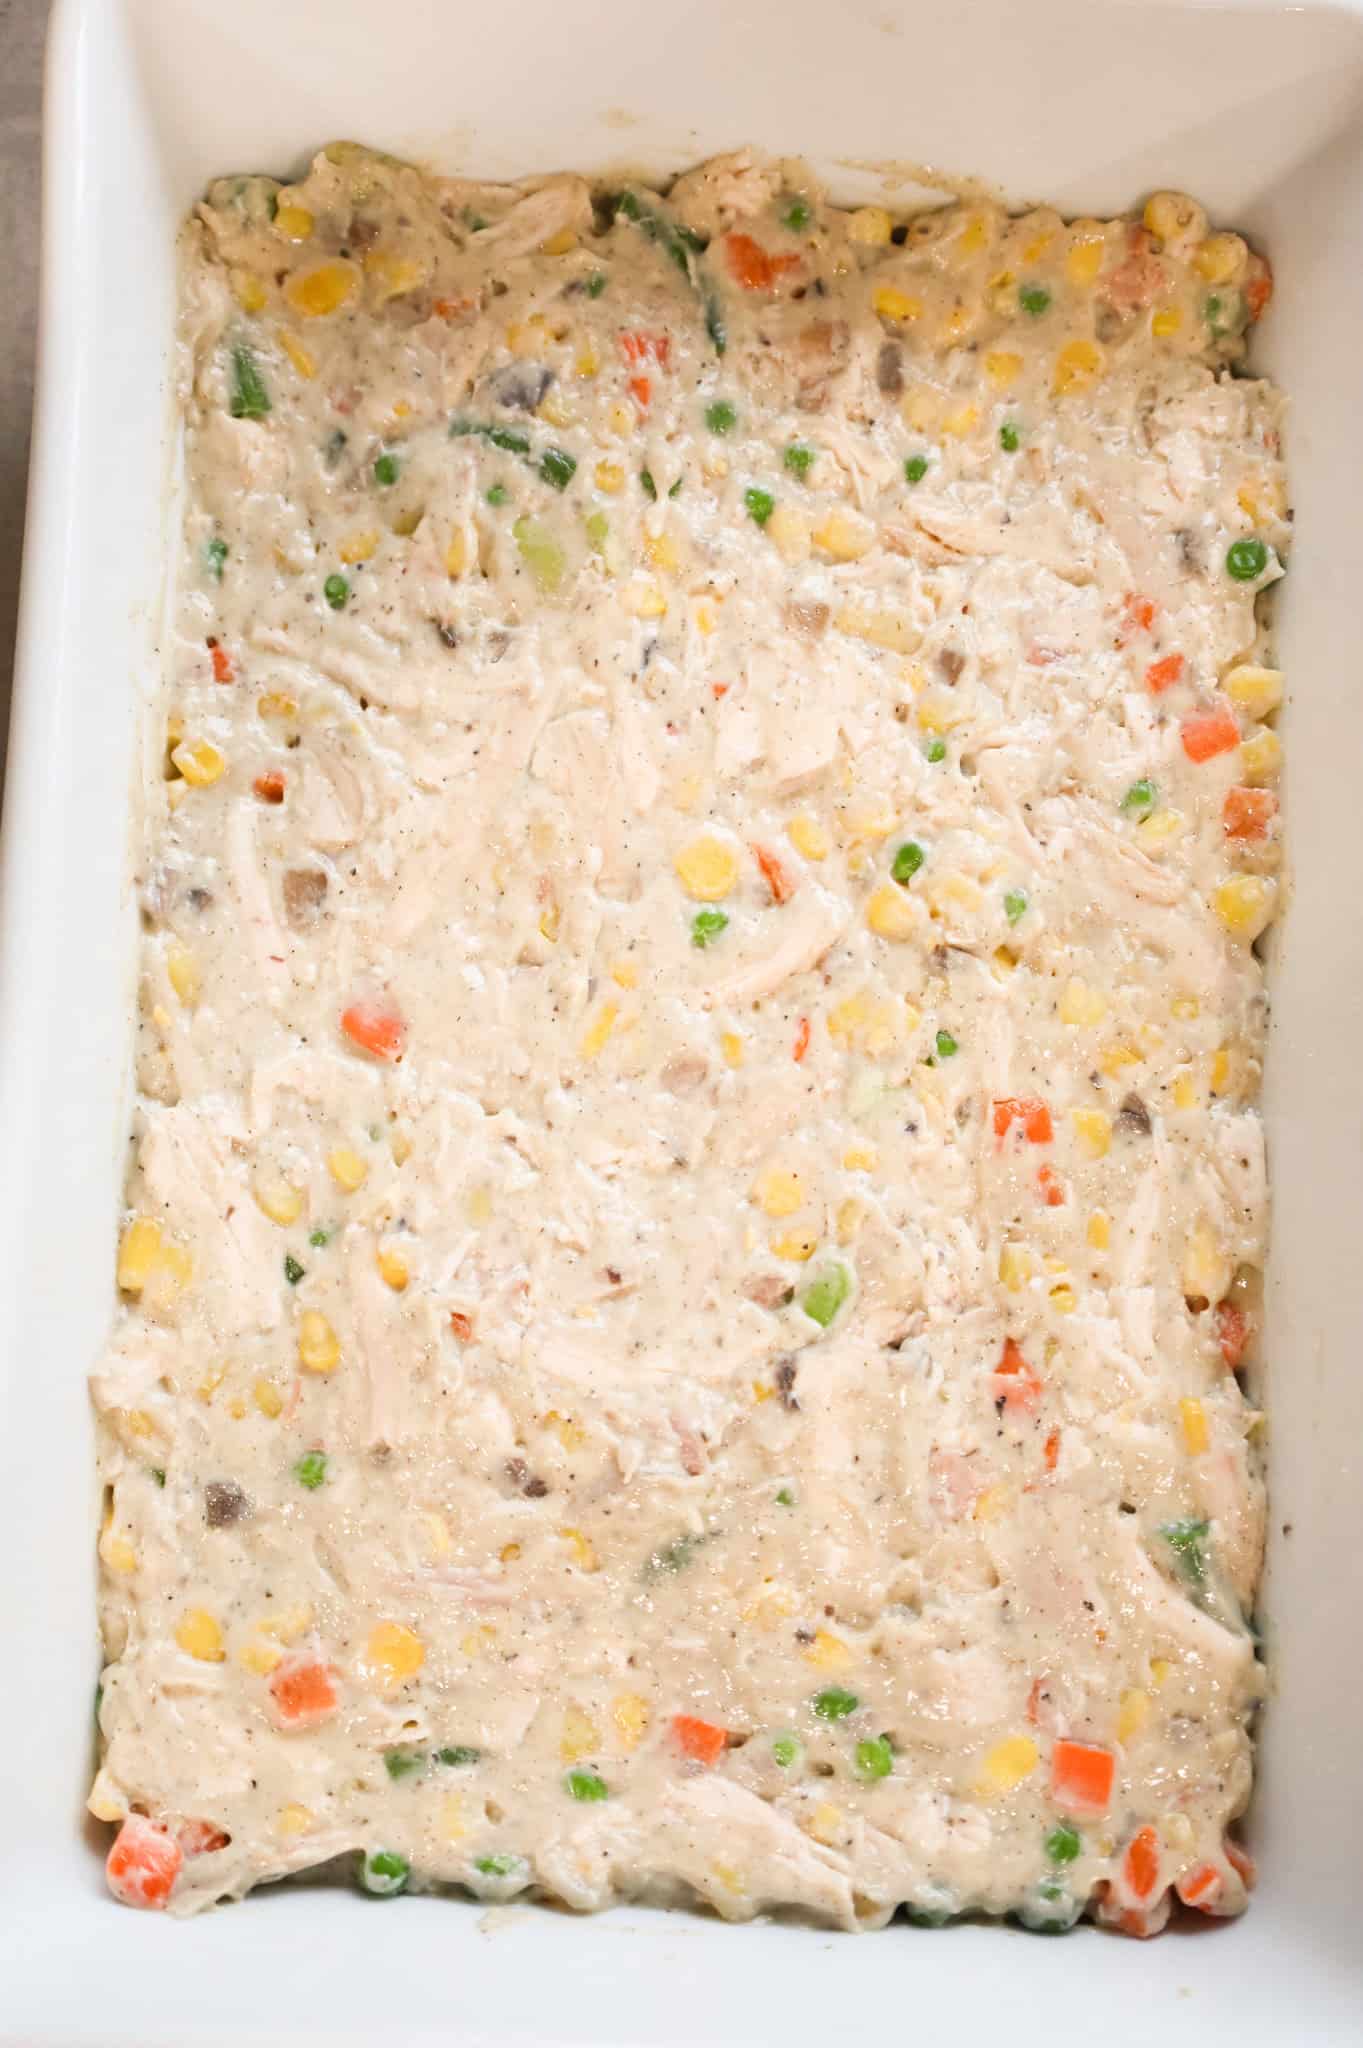 chicken, vegetable and cream soup mixture spread out in the bottom of a baking dish